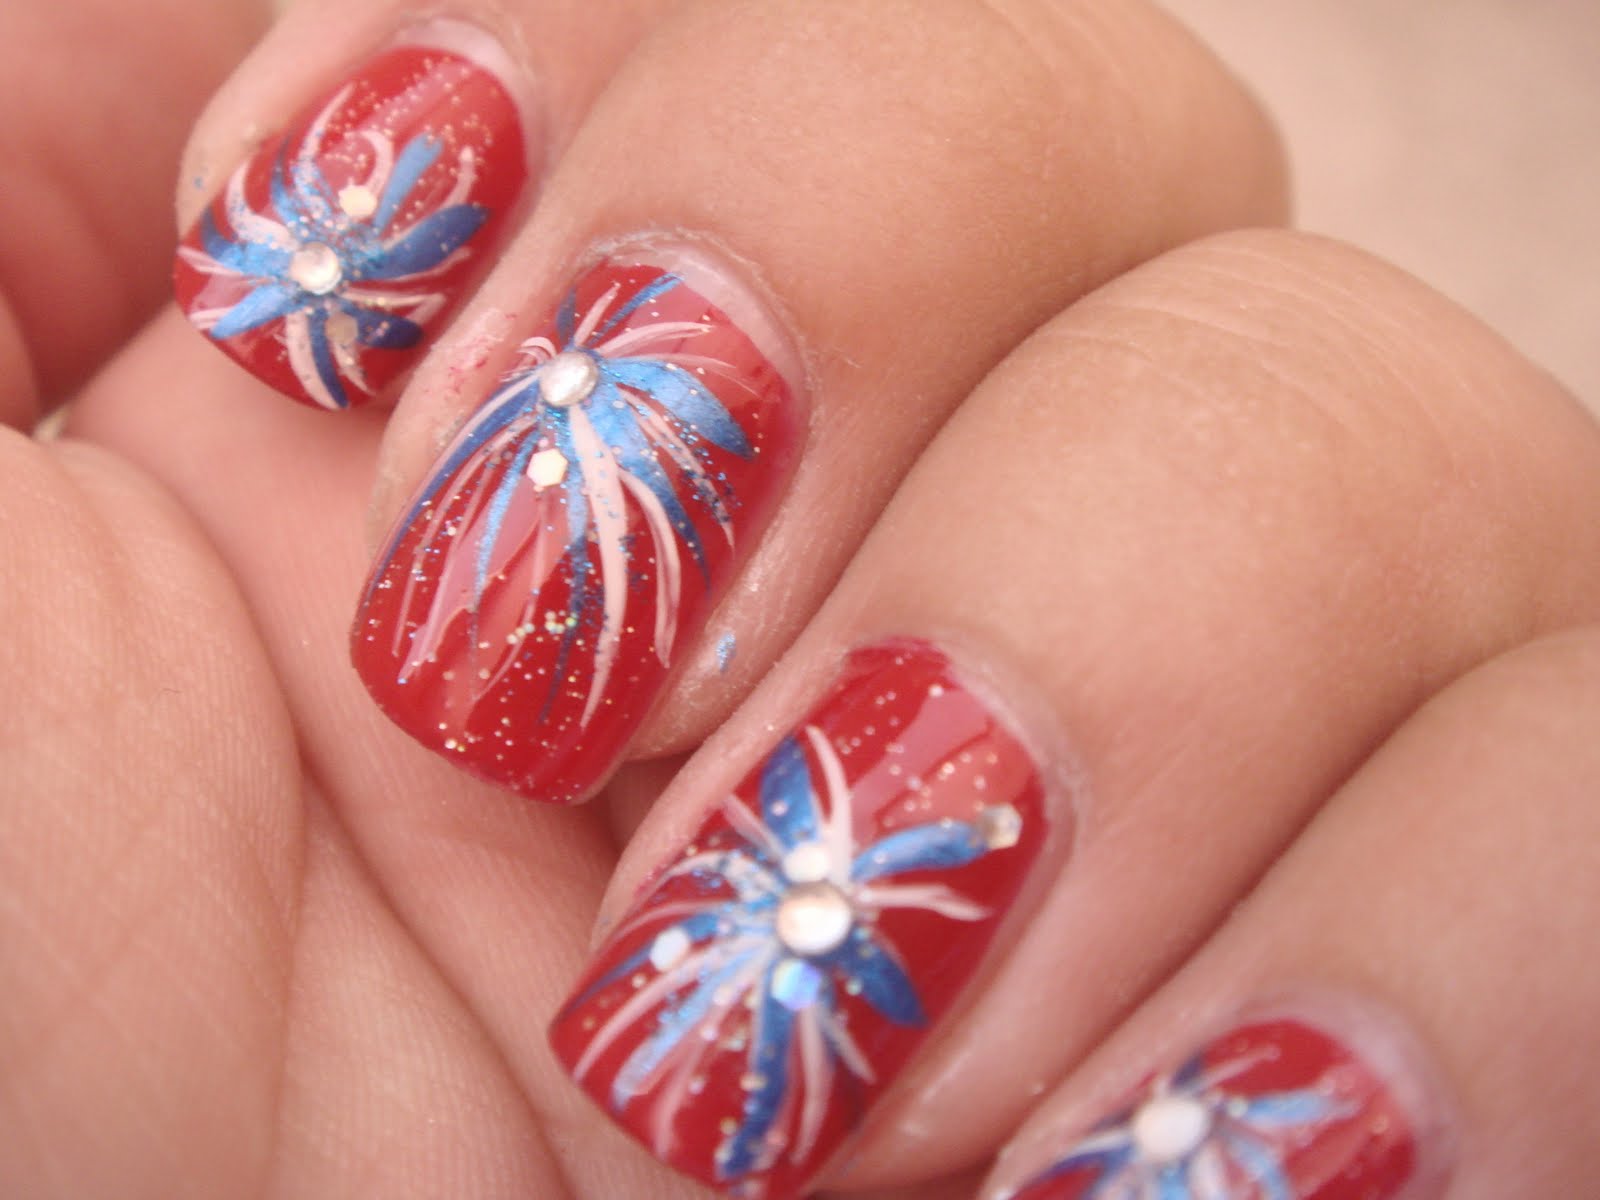 6. Sparkly 4th of July Nail Designs for a Glamorous Look - wide 5